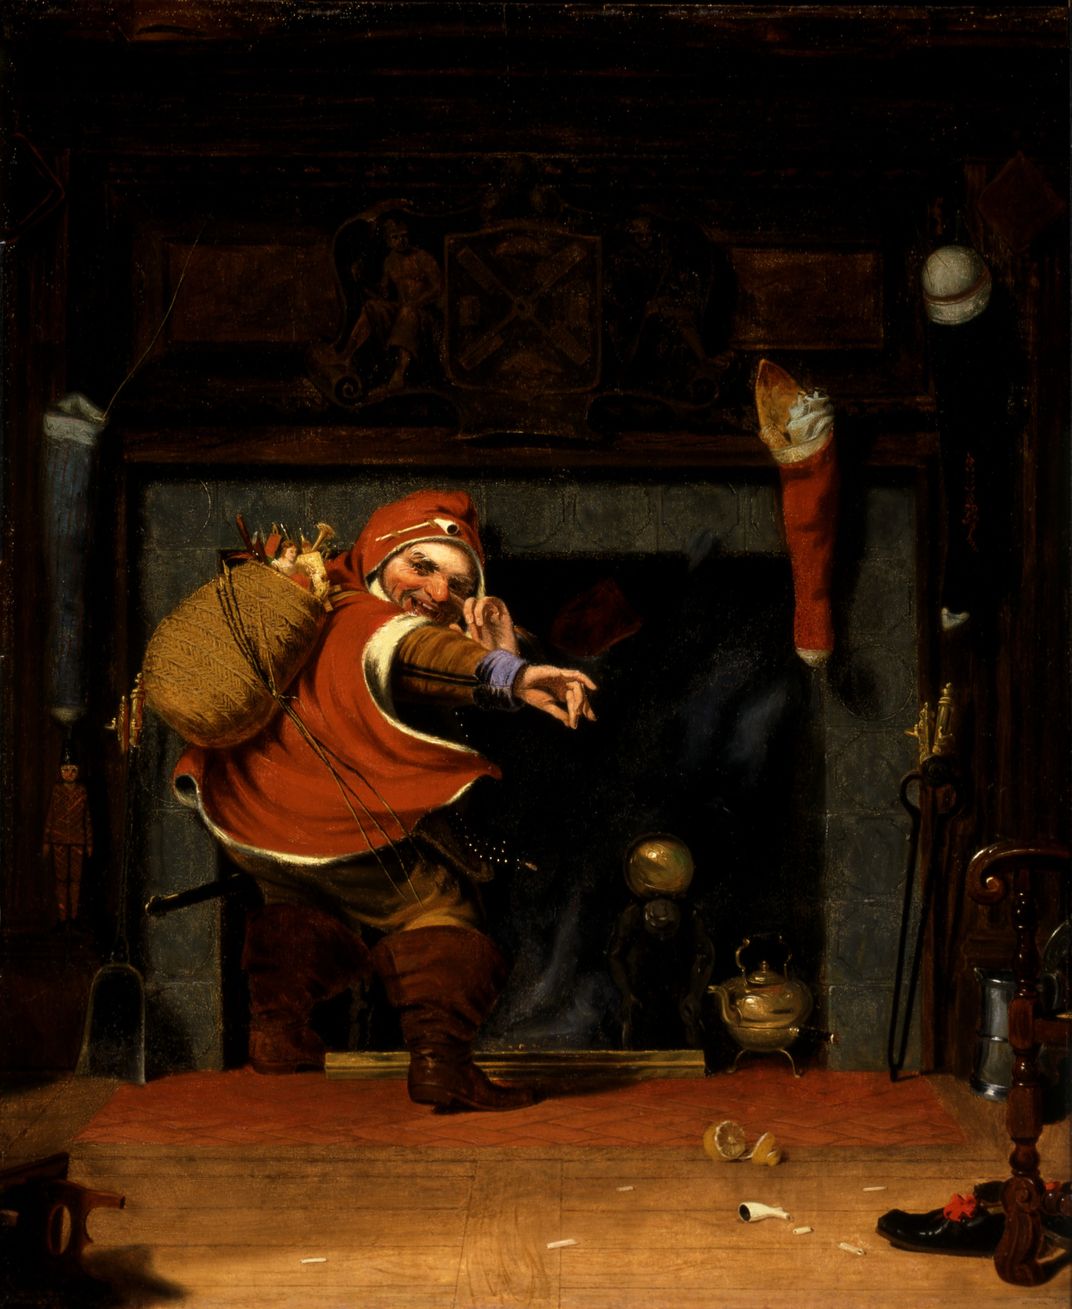 A Mischievous St. Nick from the Smithsonian American Art Museum